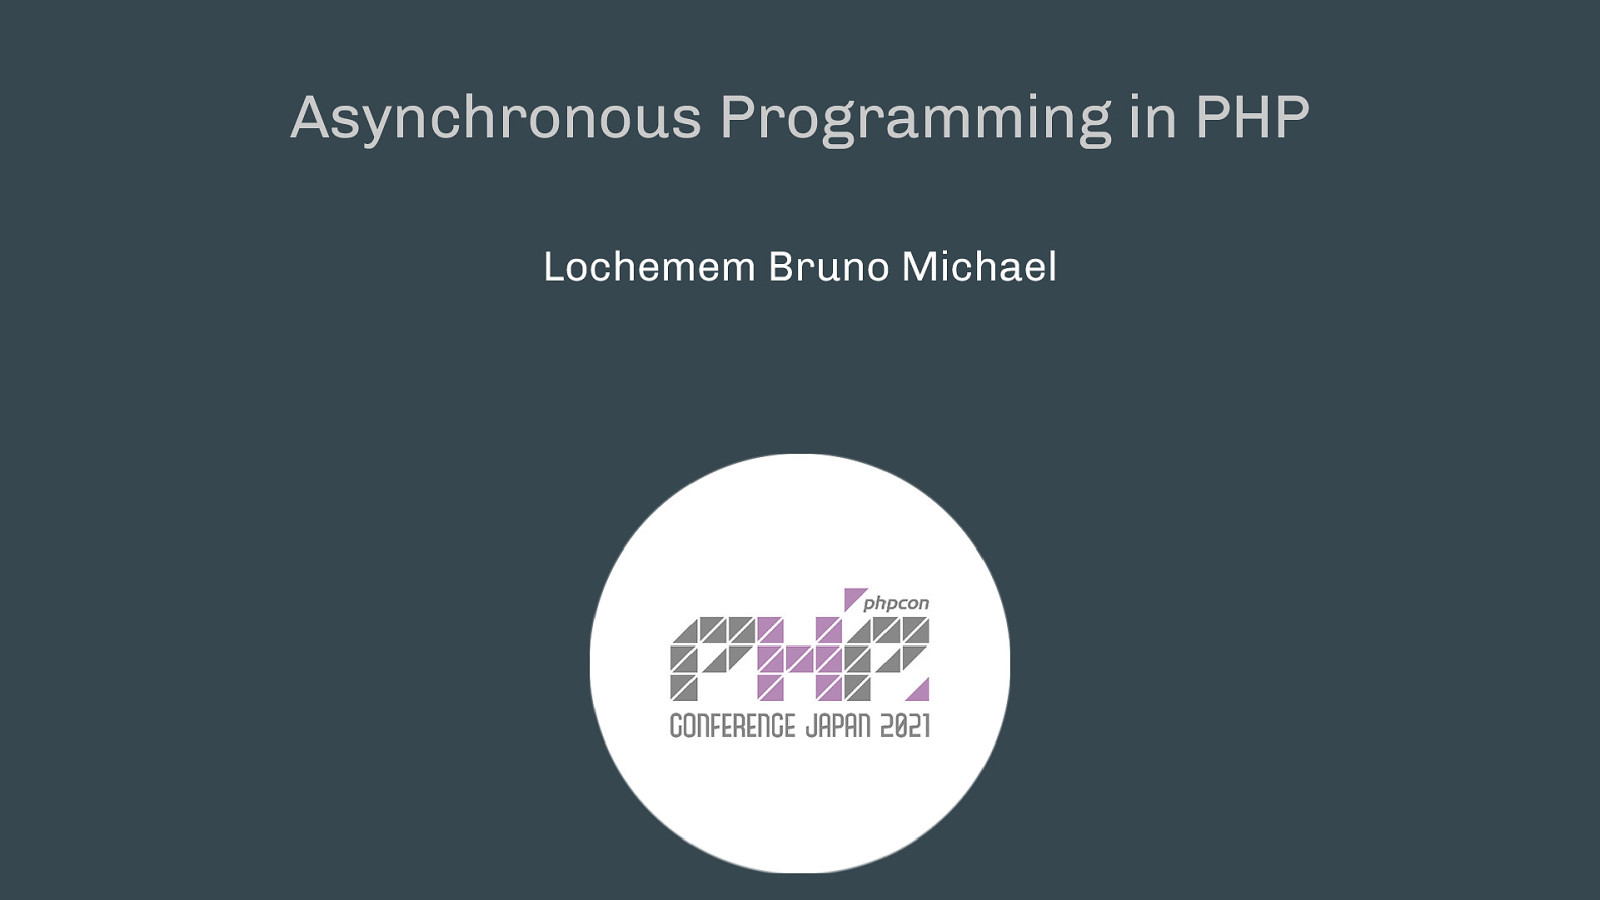 Asynchronous Programming in PHP